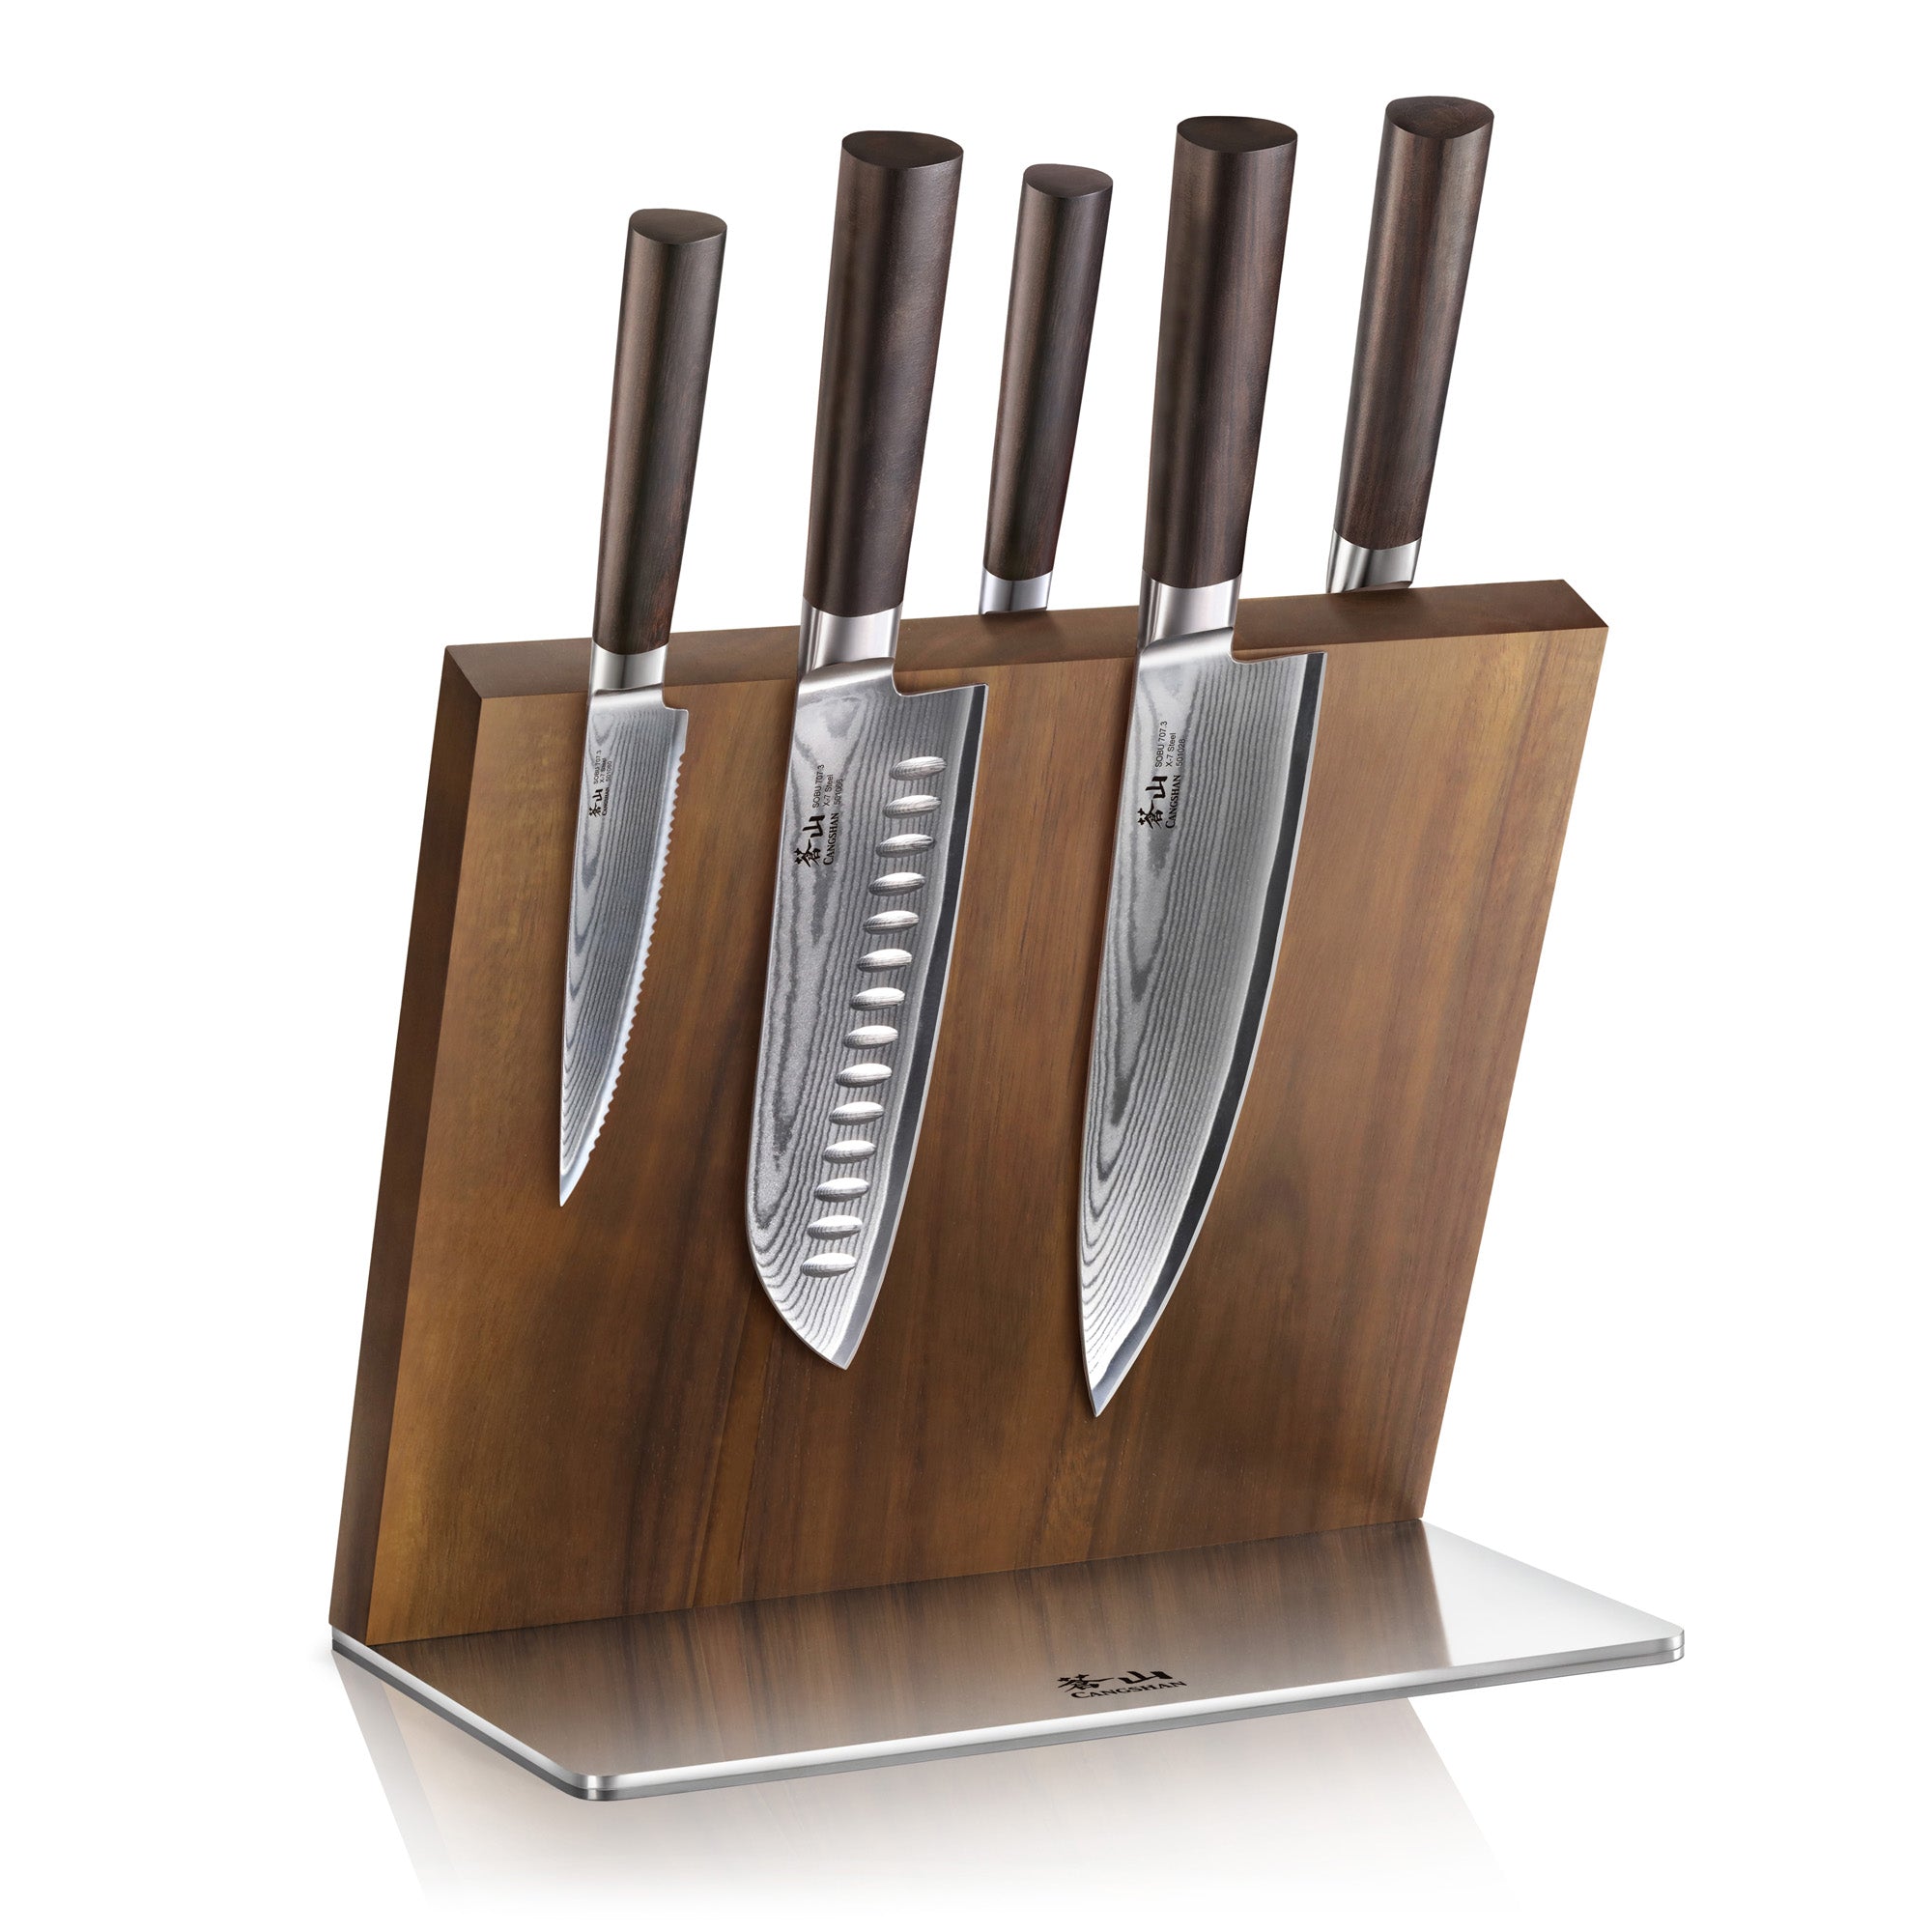 Schmidt Brothers Stainless Steel 10-Piece Knife Block Set + Reviews